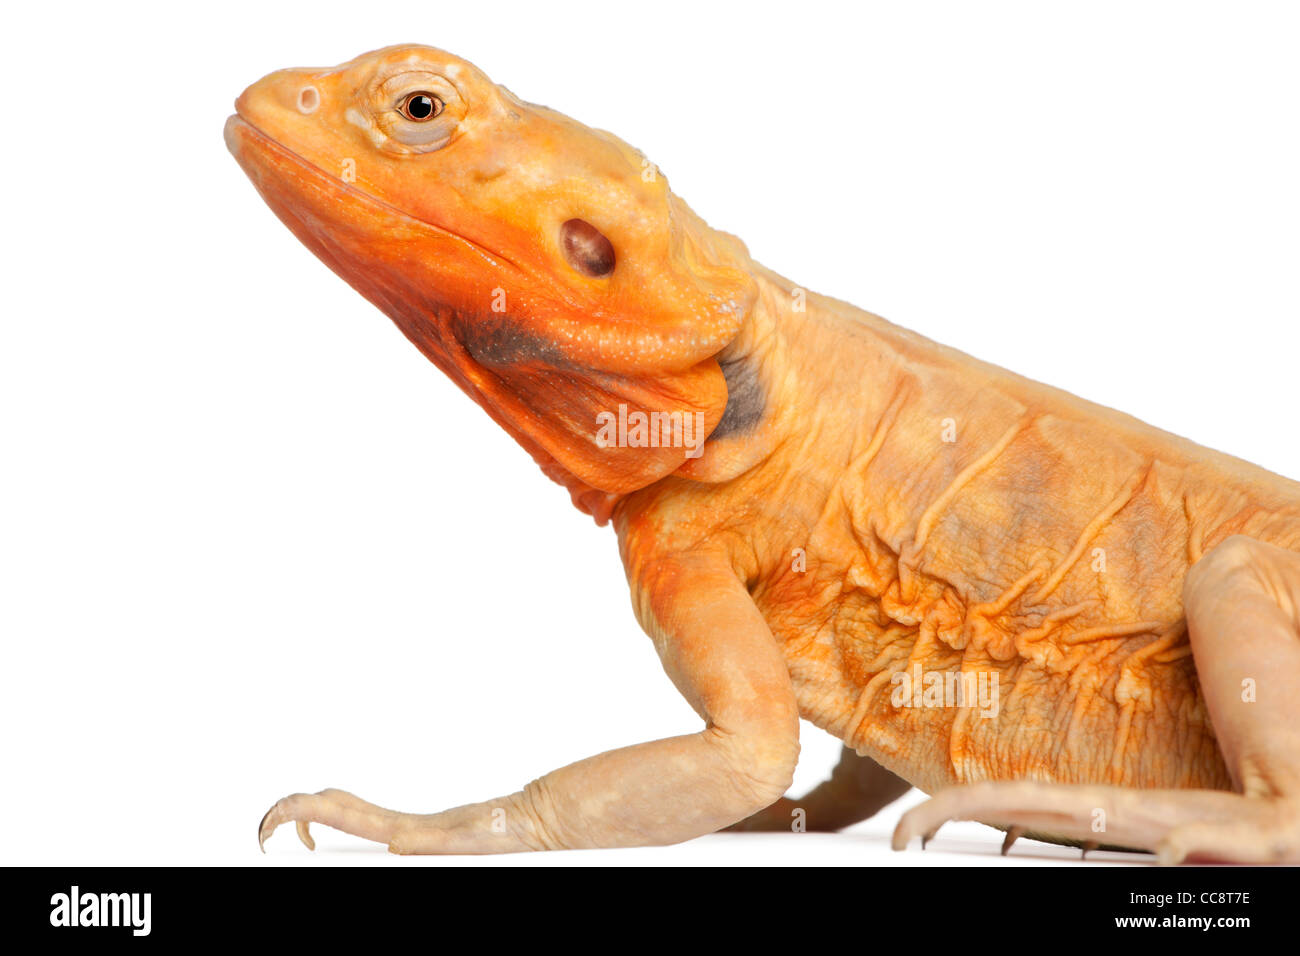 Close-up of Central Bearded Dragon, Pogona vitticeps, in front of white background Banque D'Images